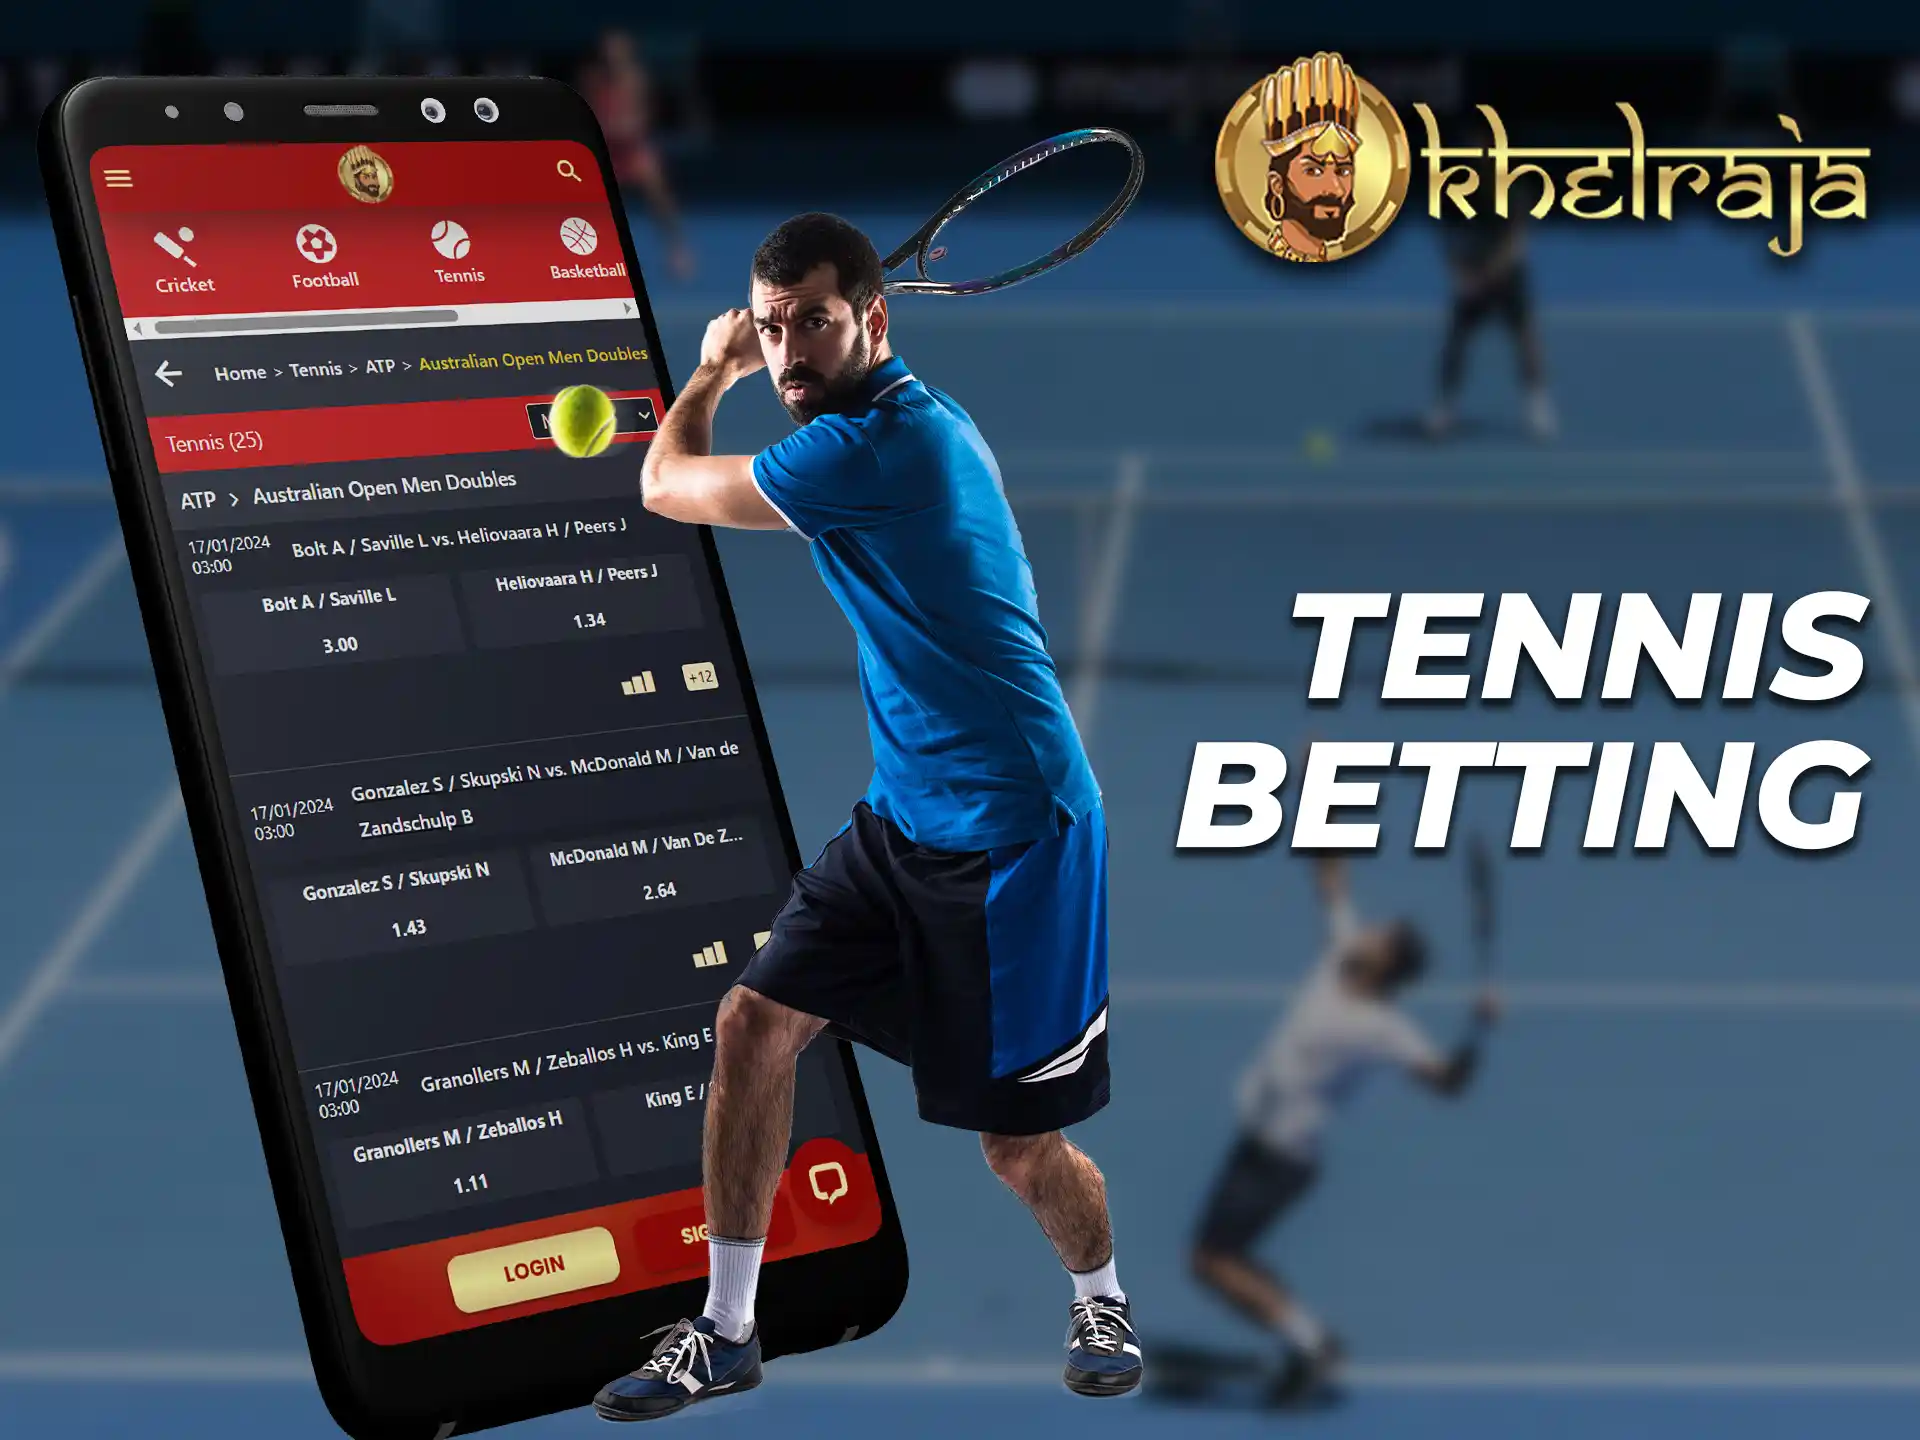 Bet on tennis with great odds on the Khelraja app.